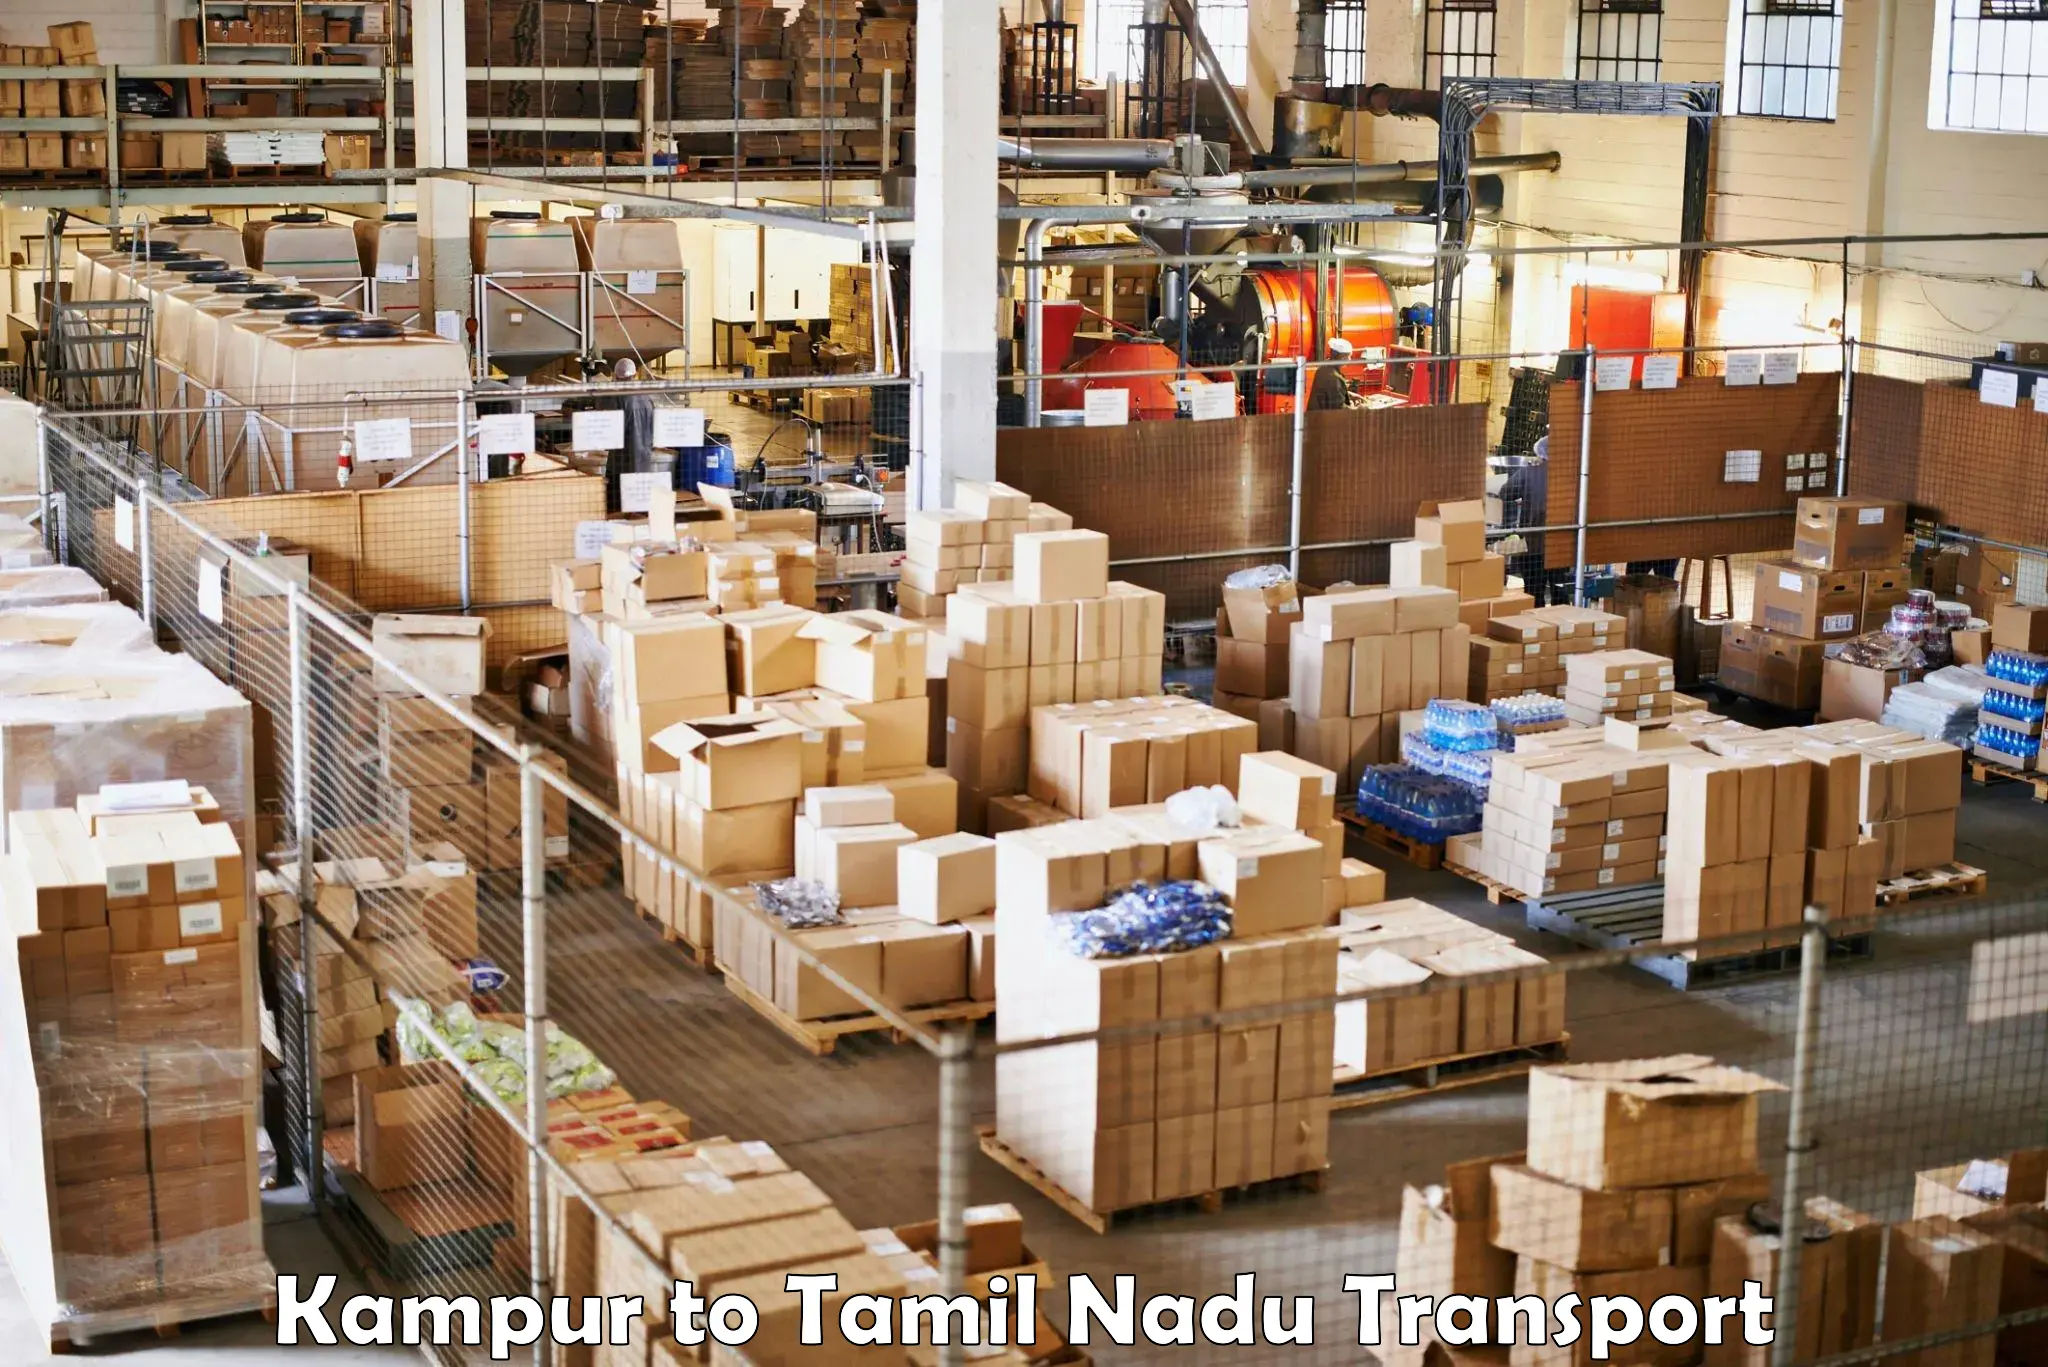 Road transport online services Kampur to SRM Institute of Science and Technology Chennai